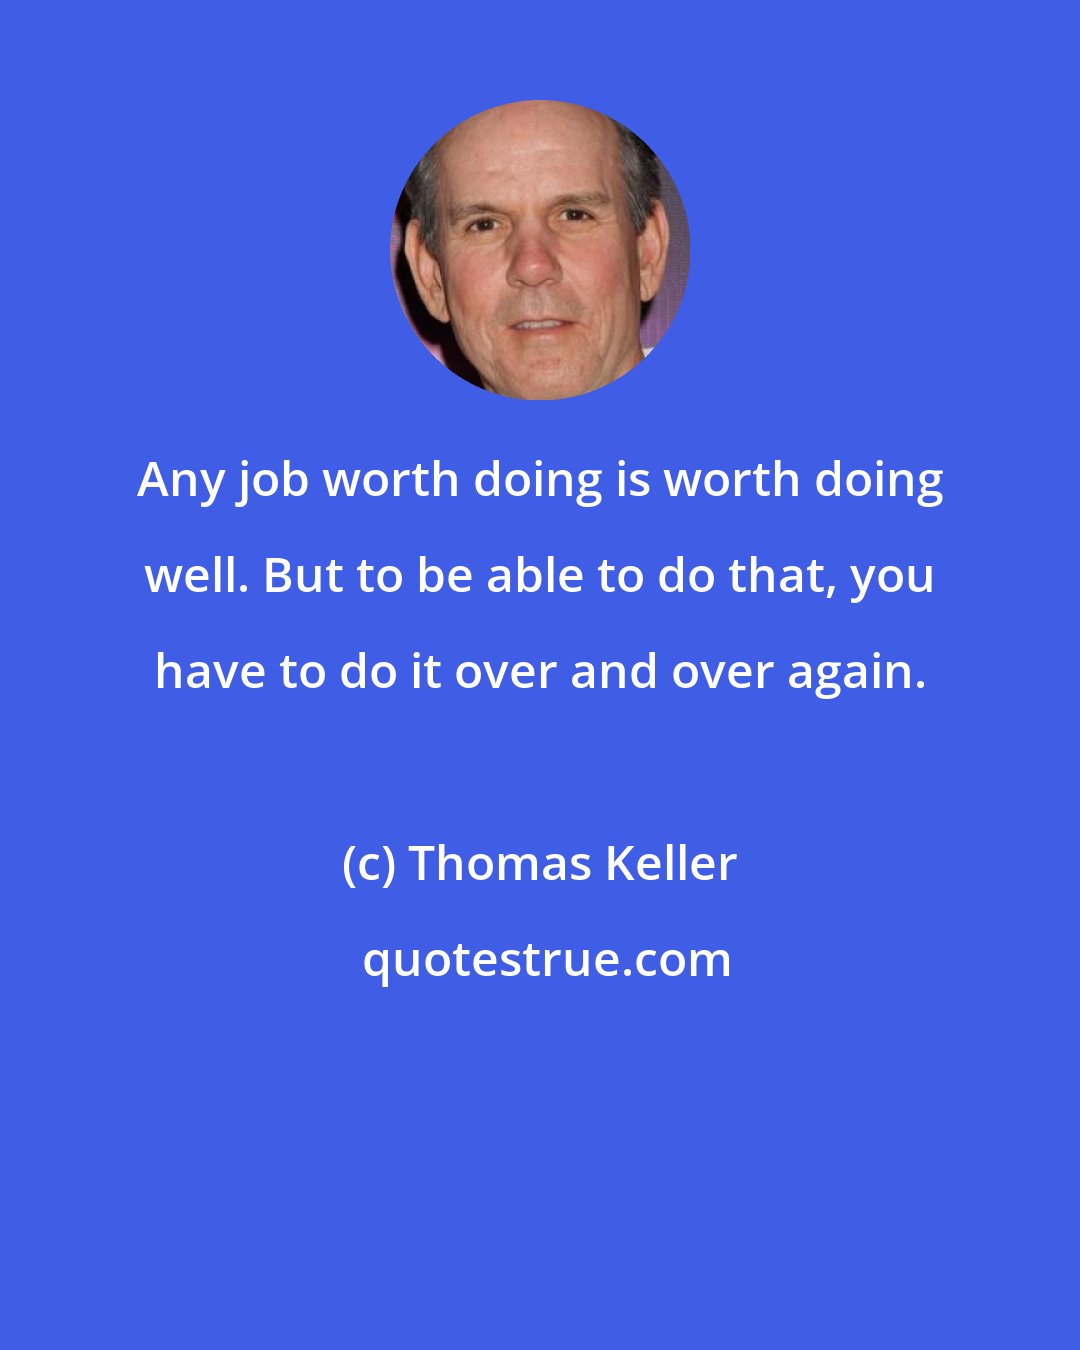 Thomas Keller: Any job worth doing is worth doing well. But to be able to do that, you have to do it over and over again.